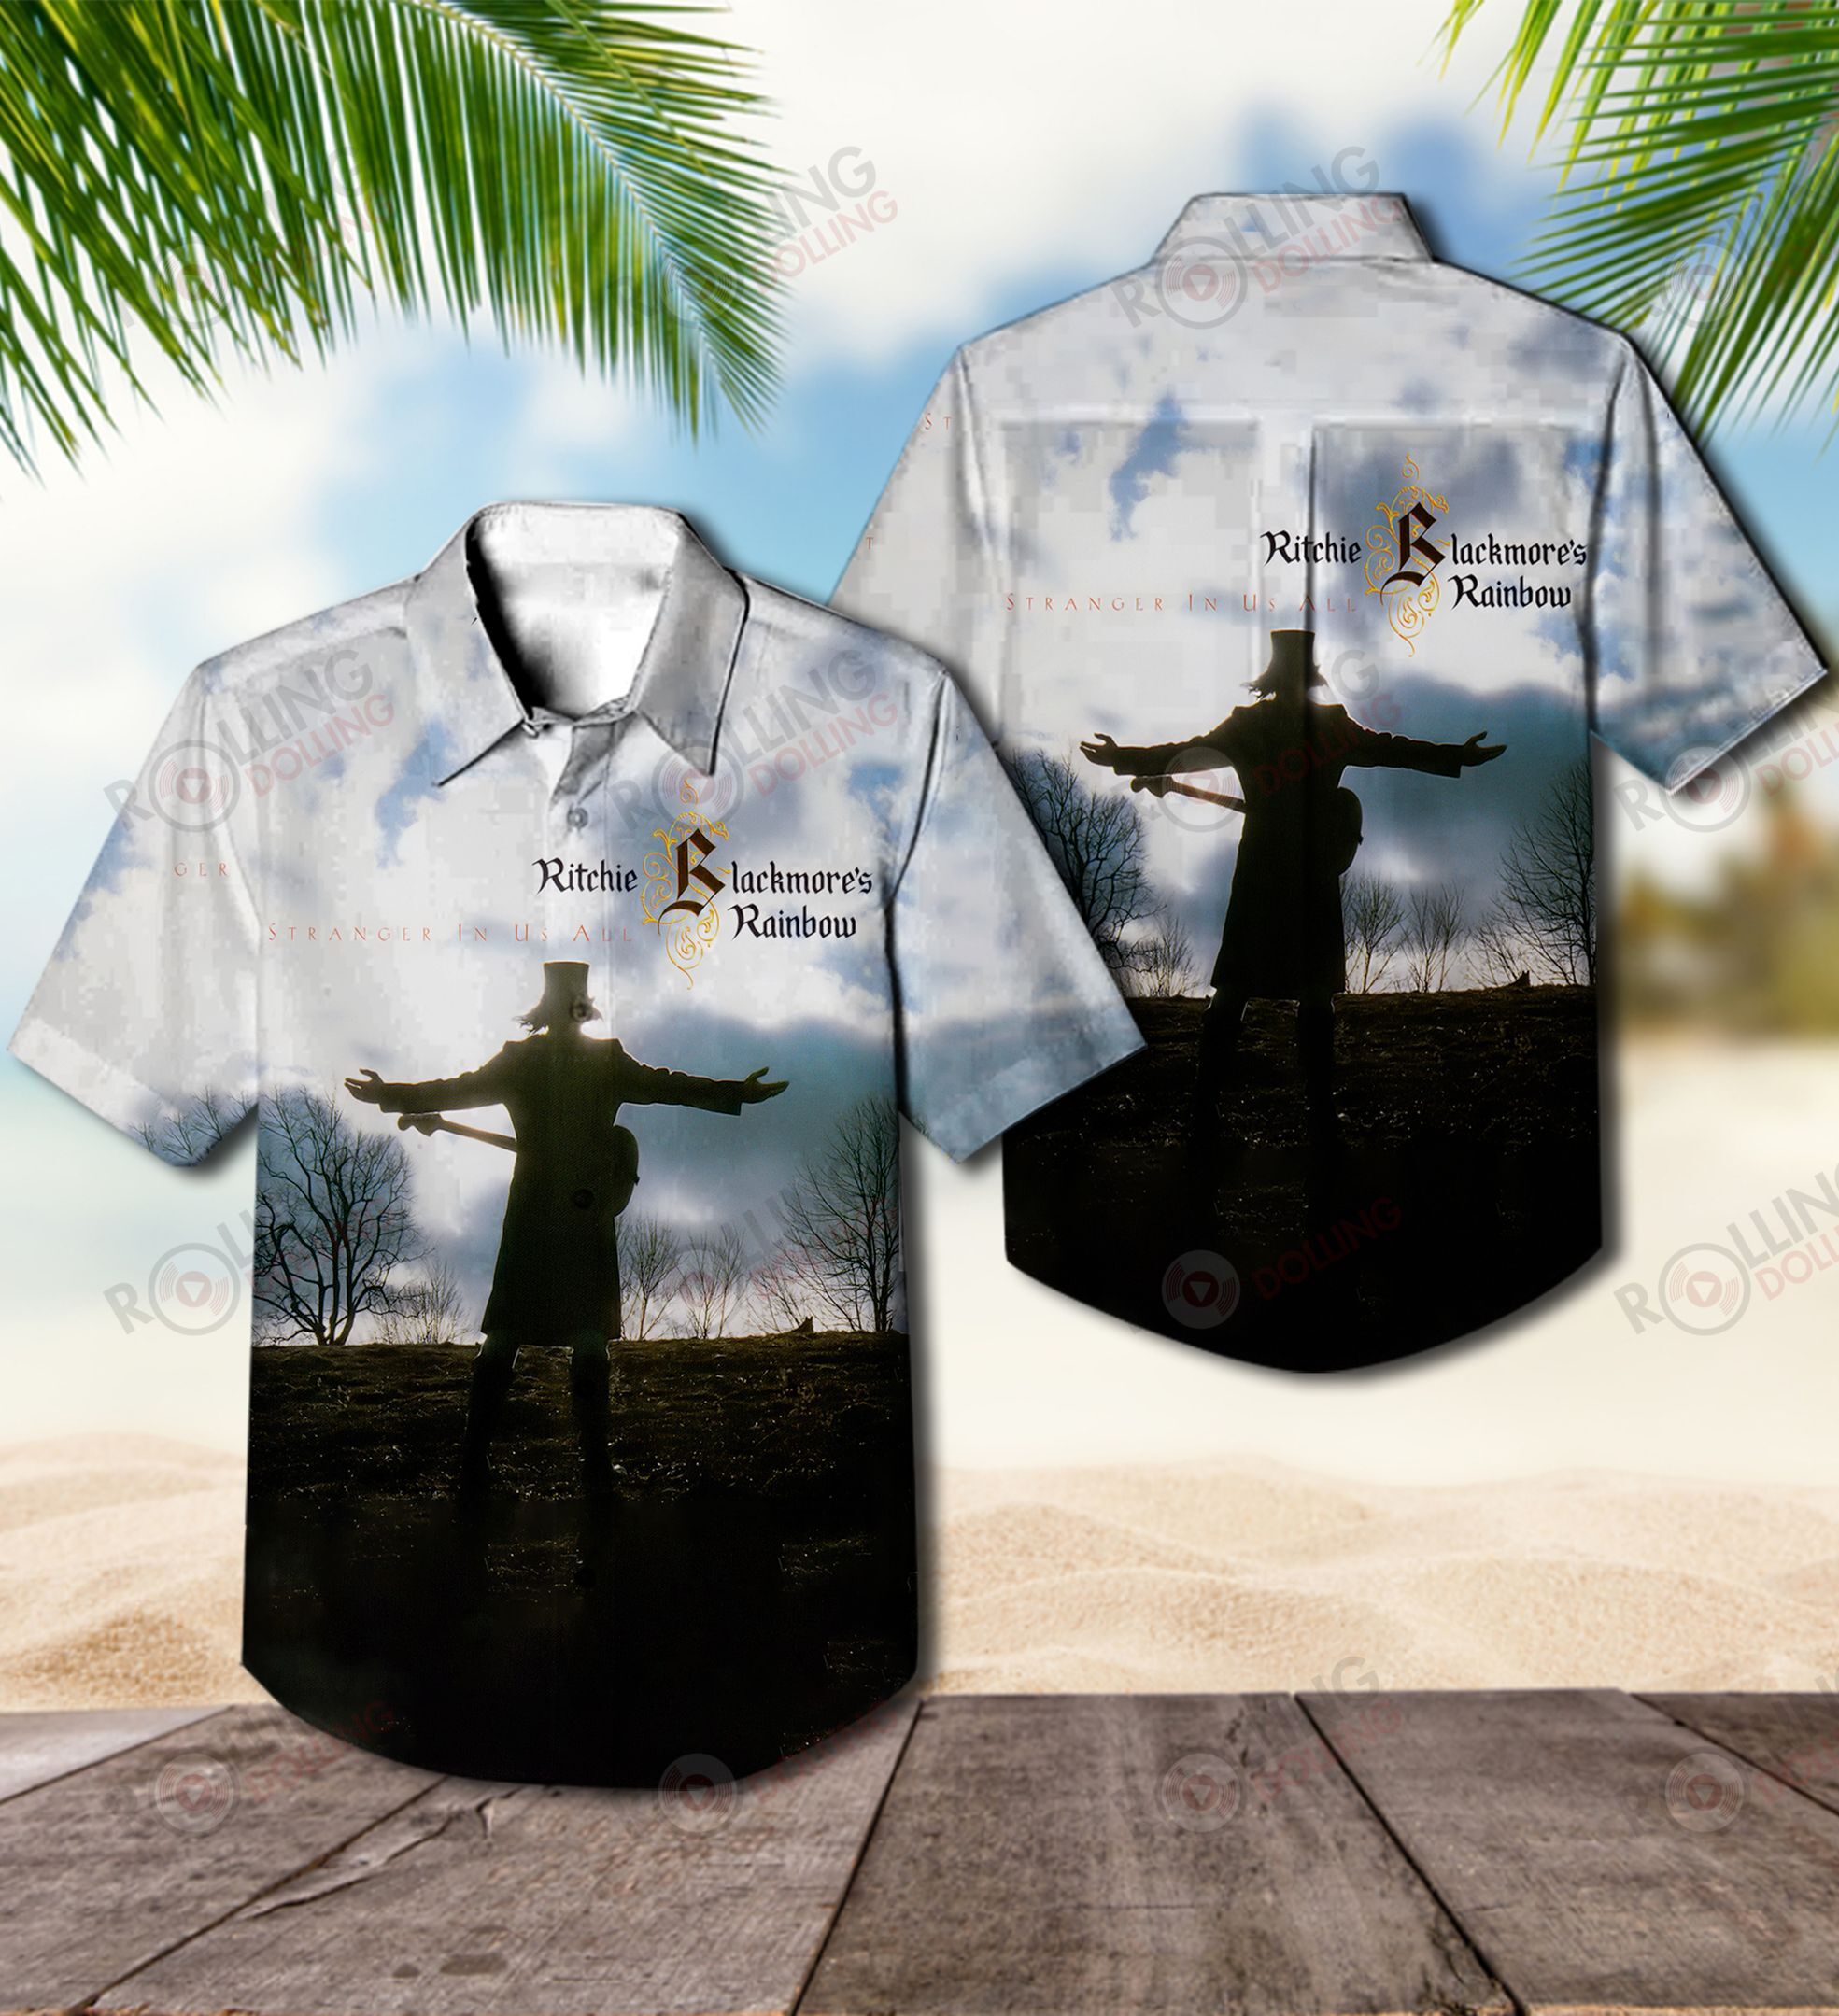 These Hawaiian Shirt will be a great choice for any type of occasion 170